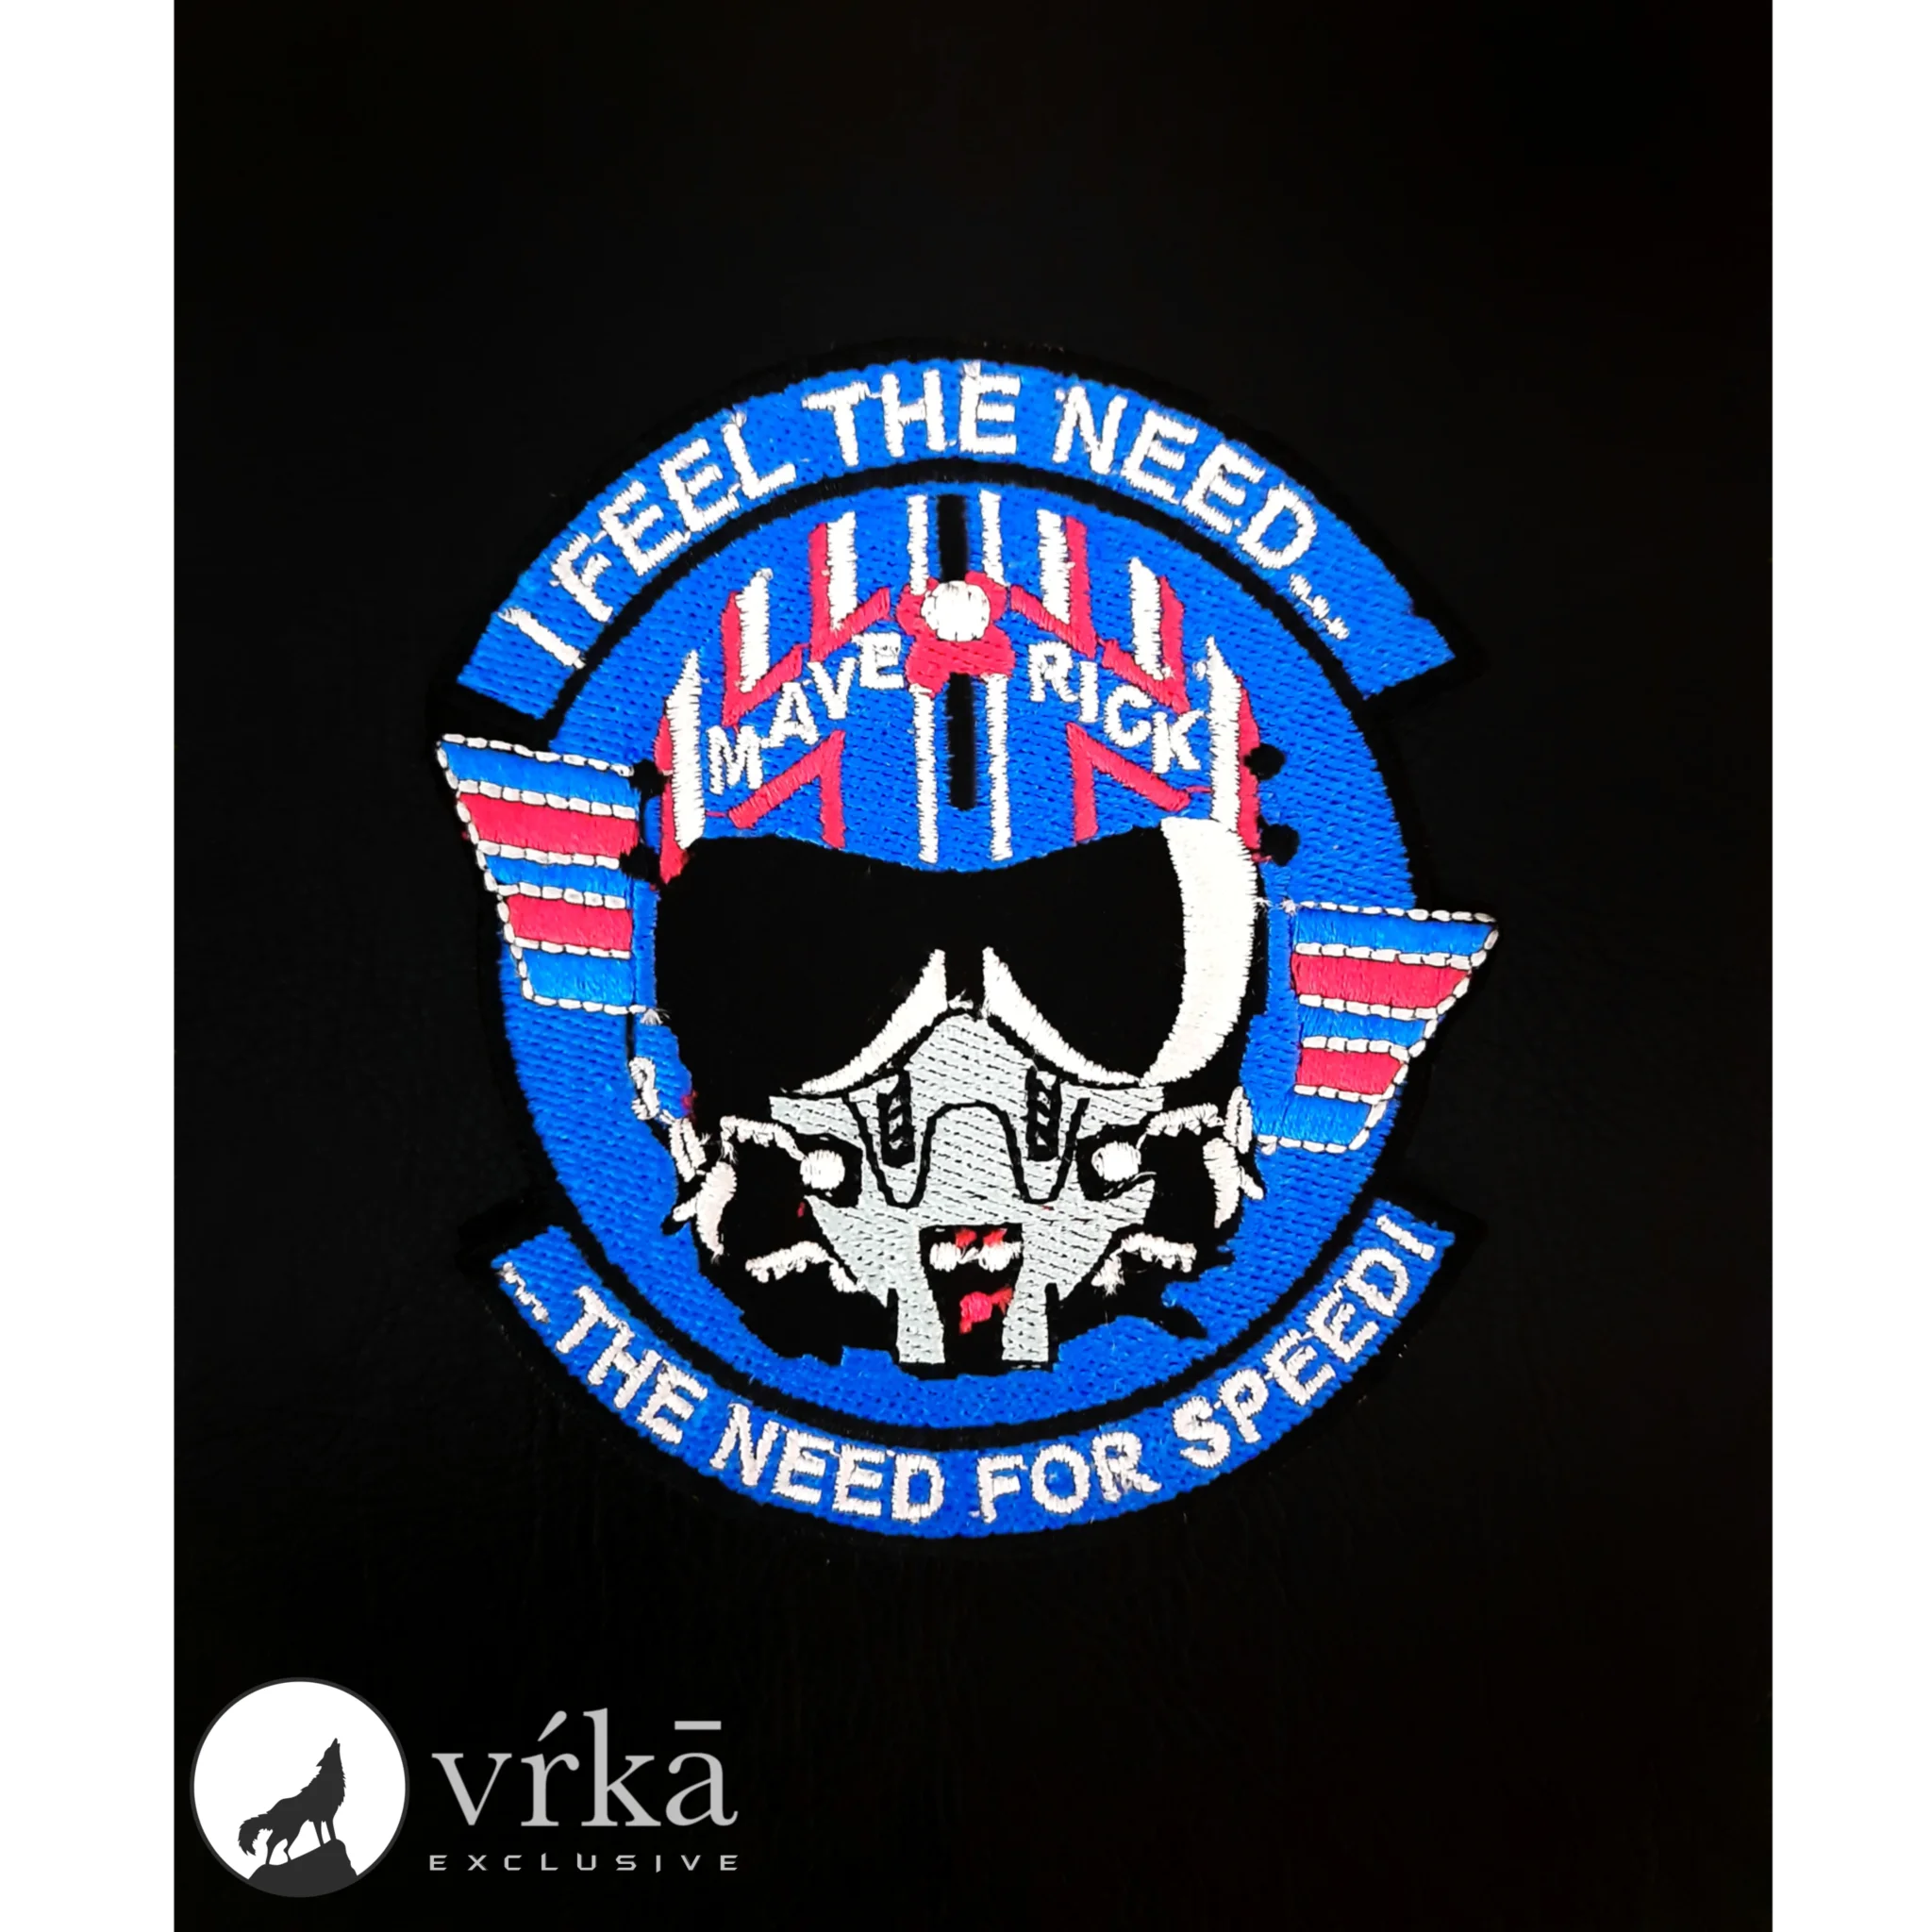 I FEEL THE NEED THE NEED FOR SPEED! Iron on Patch